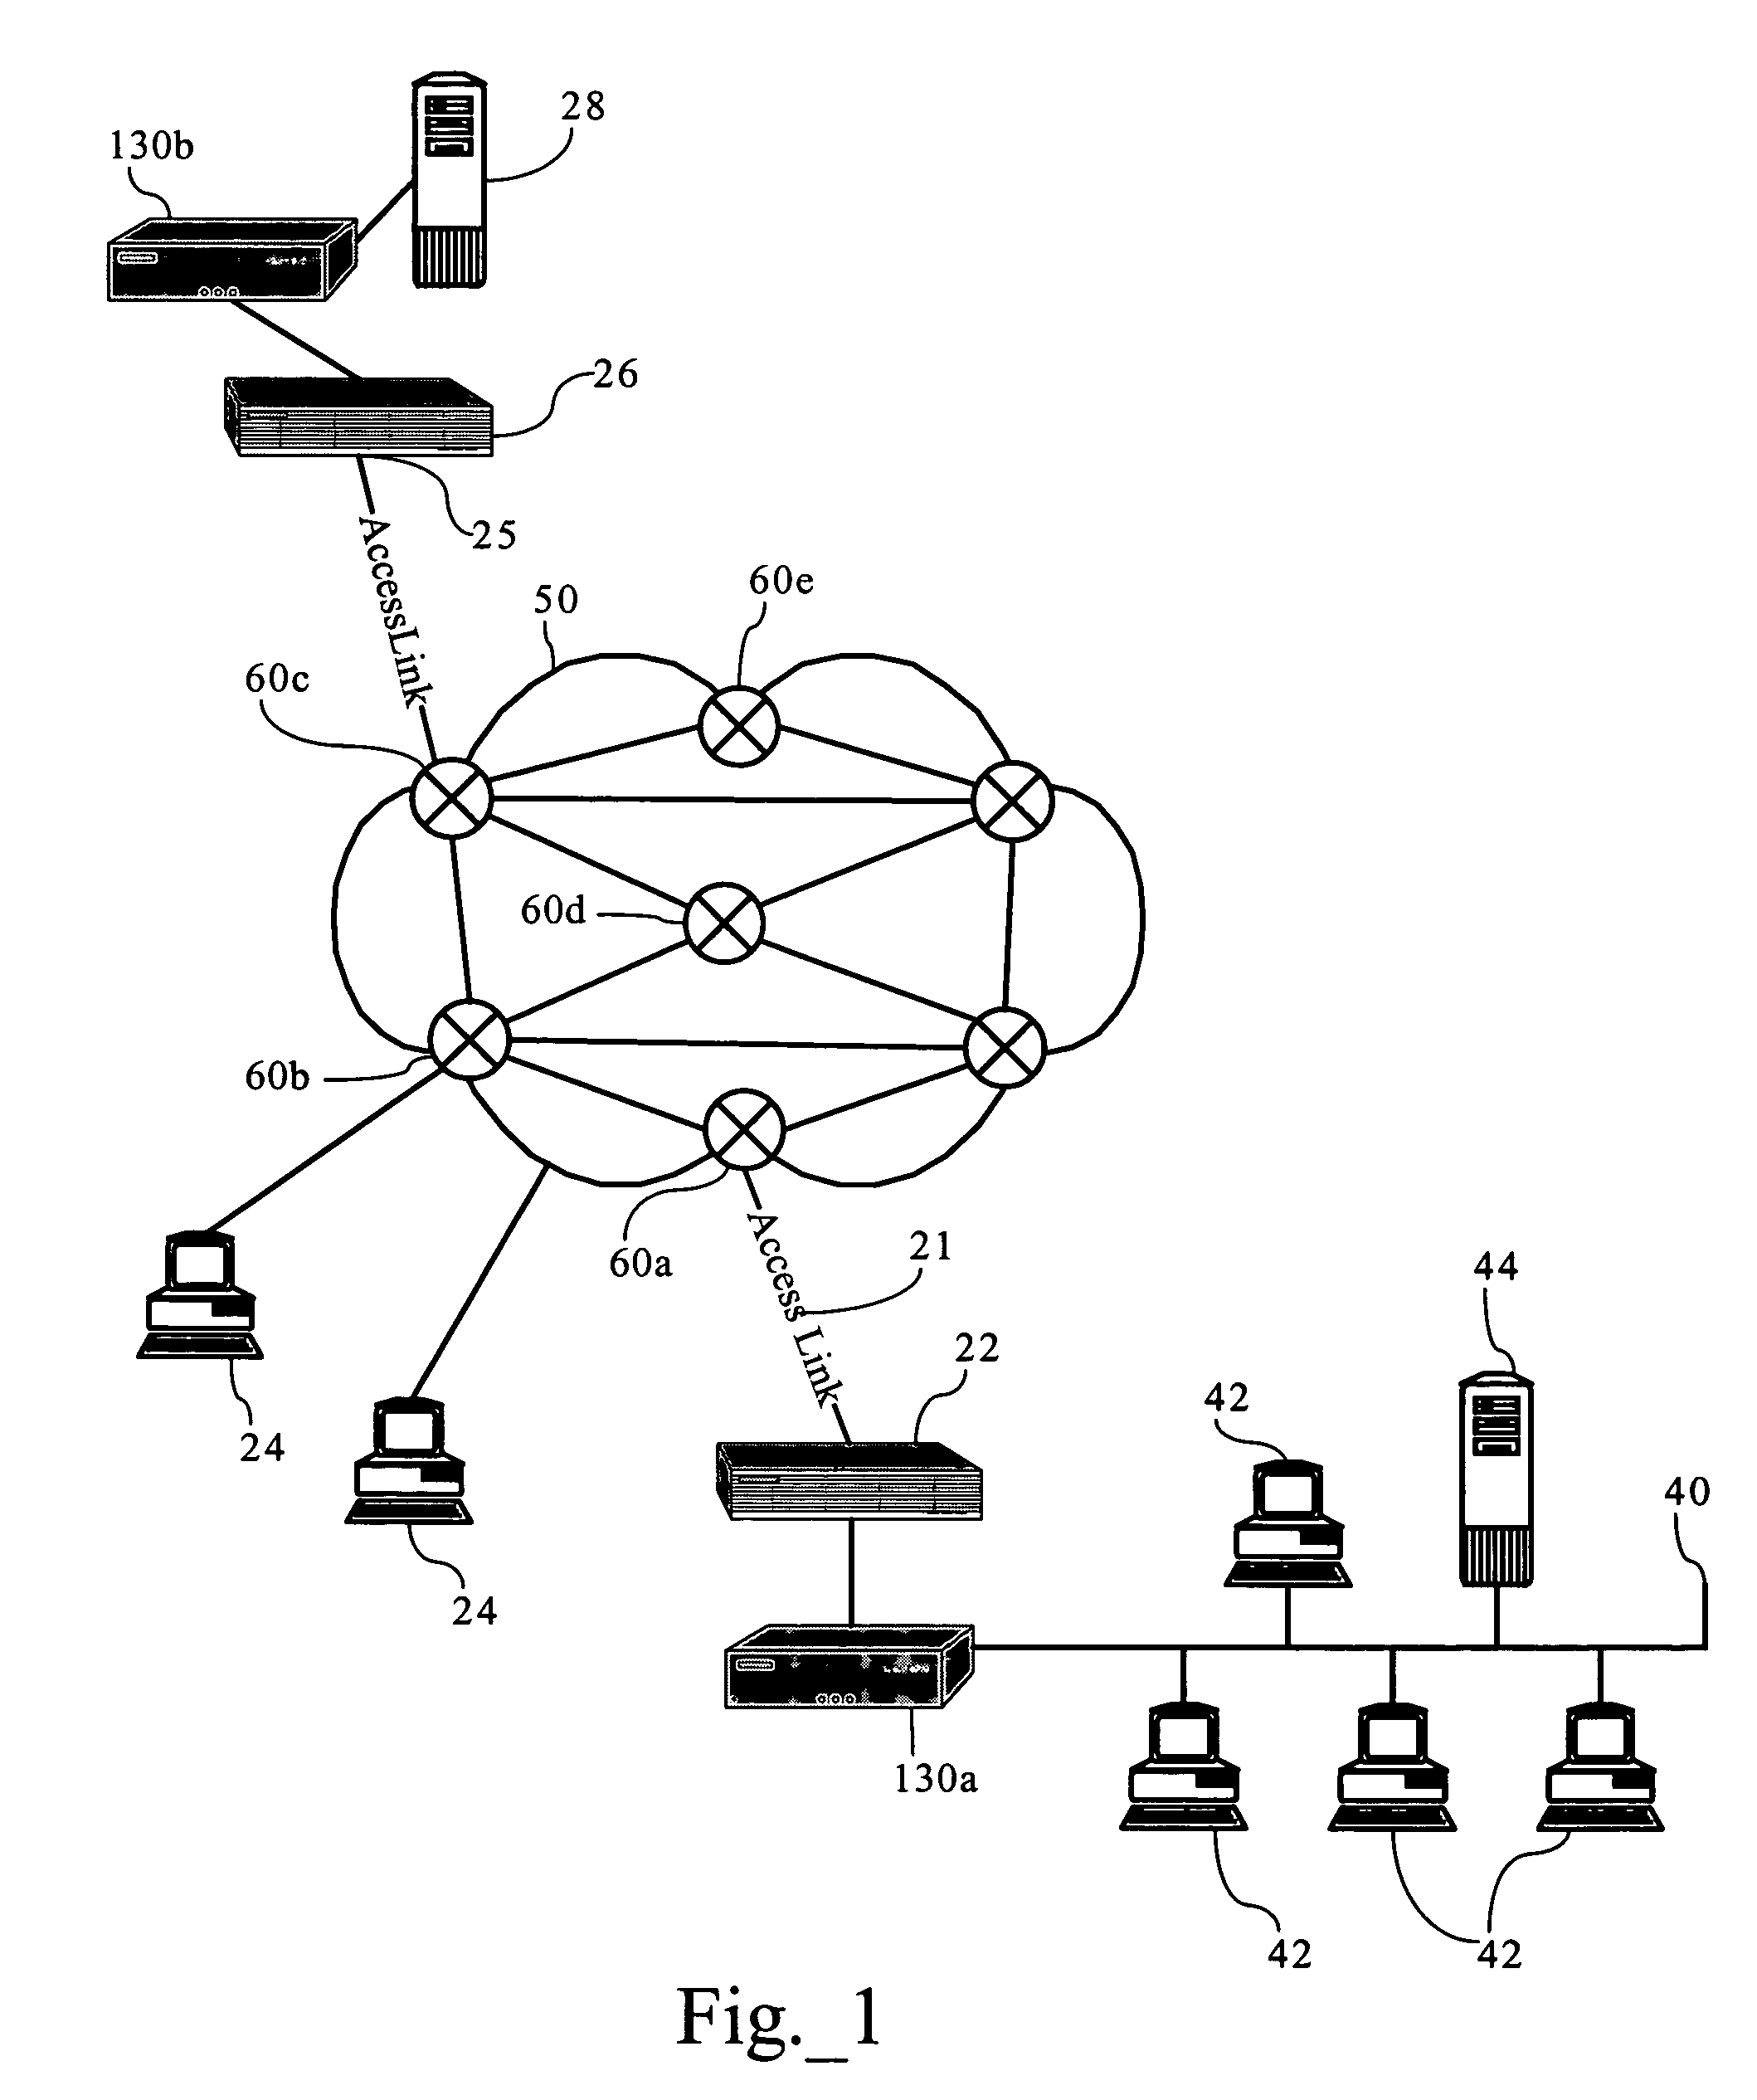 Adaptive network traffic compression mechanism including dynamic selection of compression algorithms